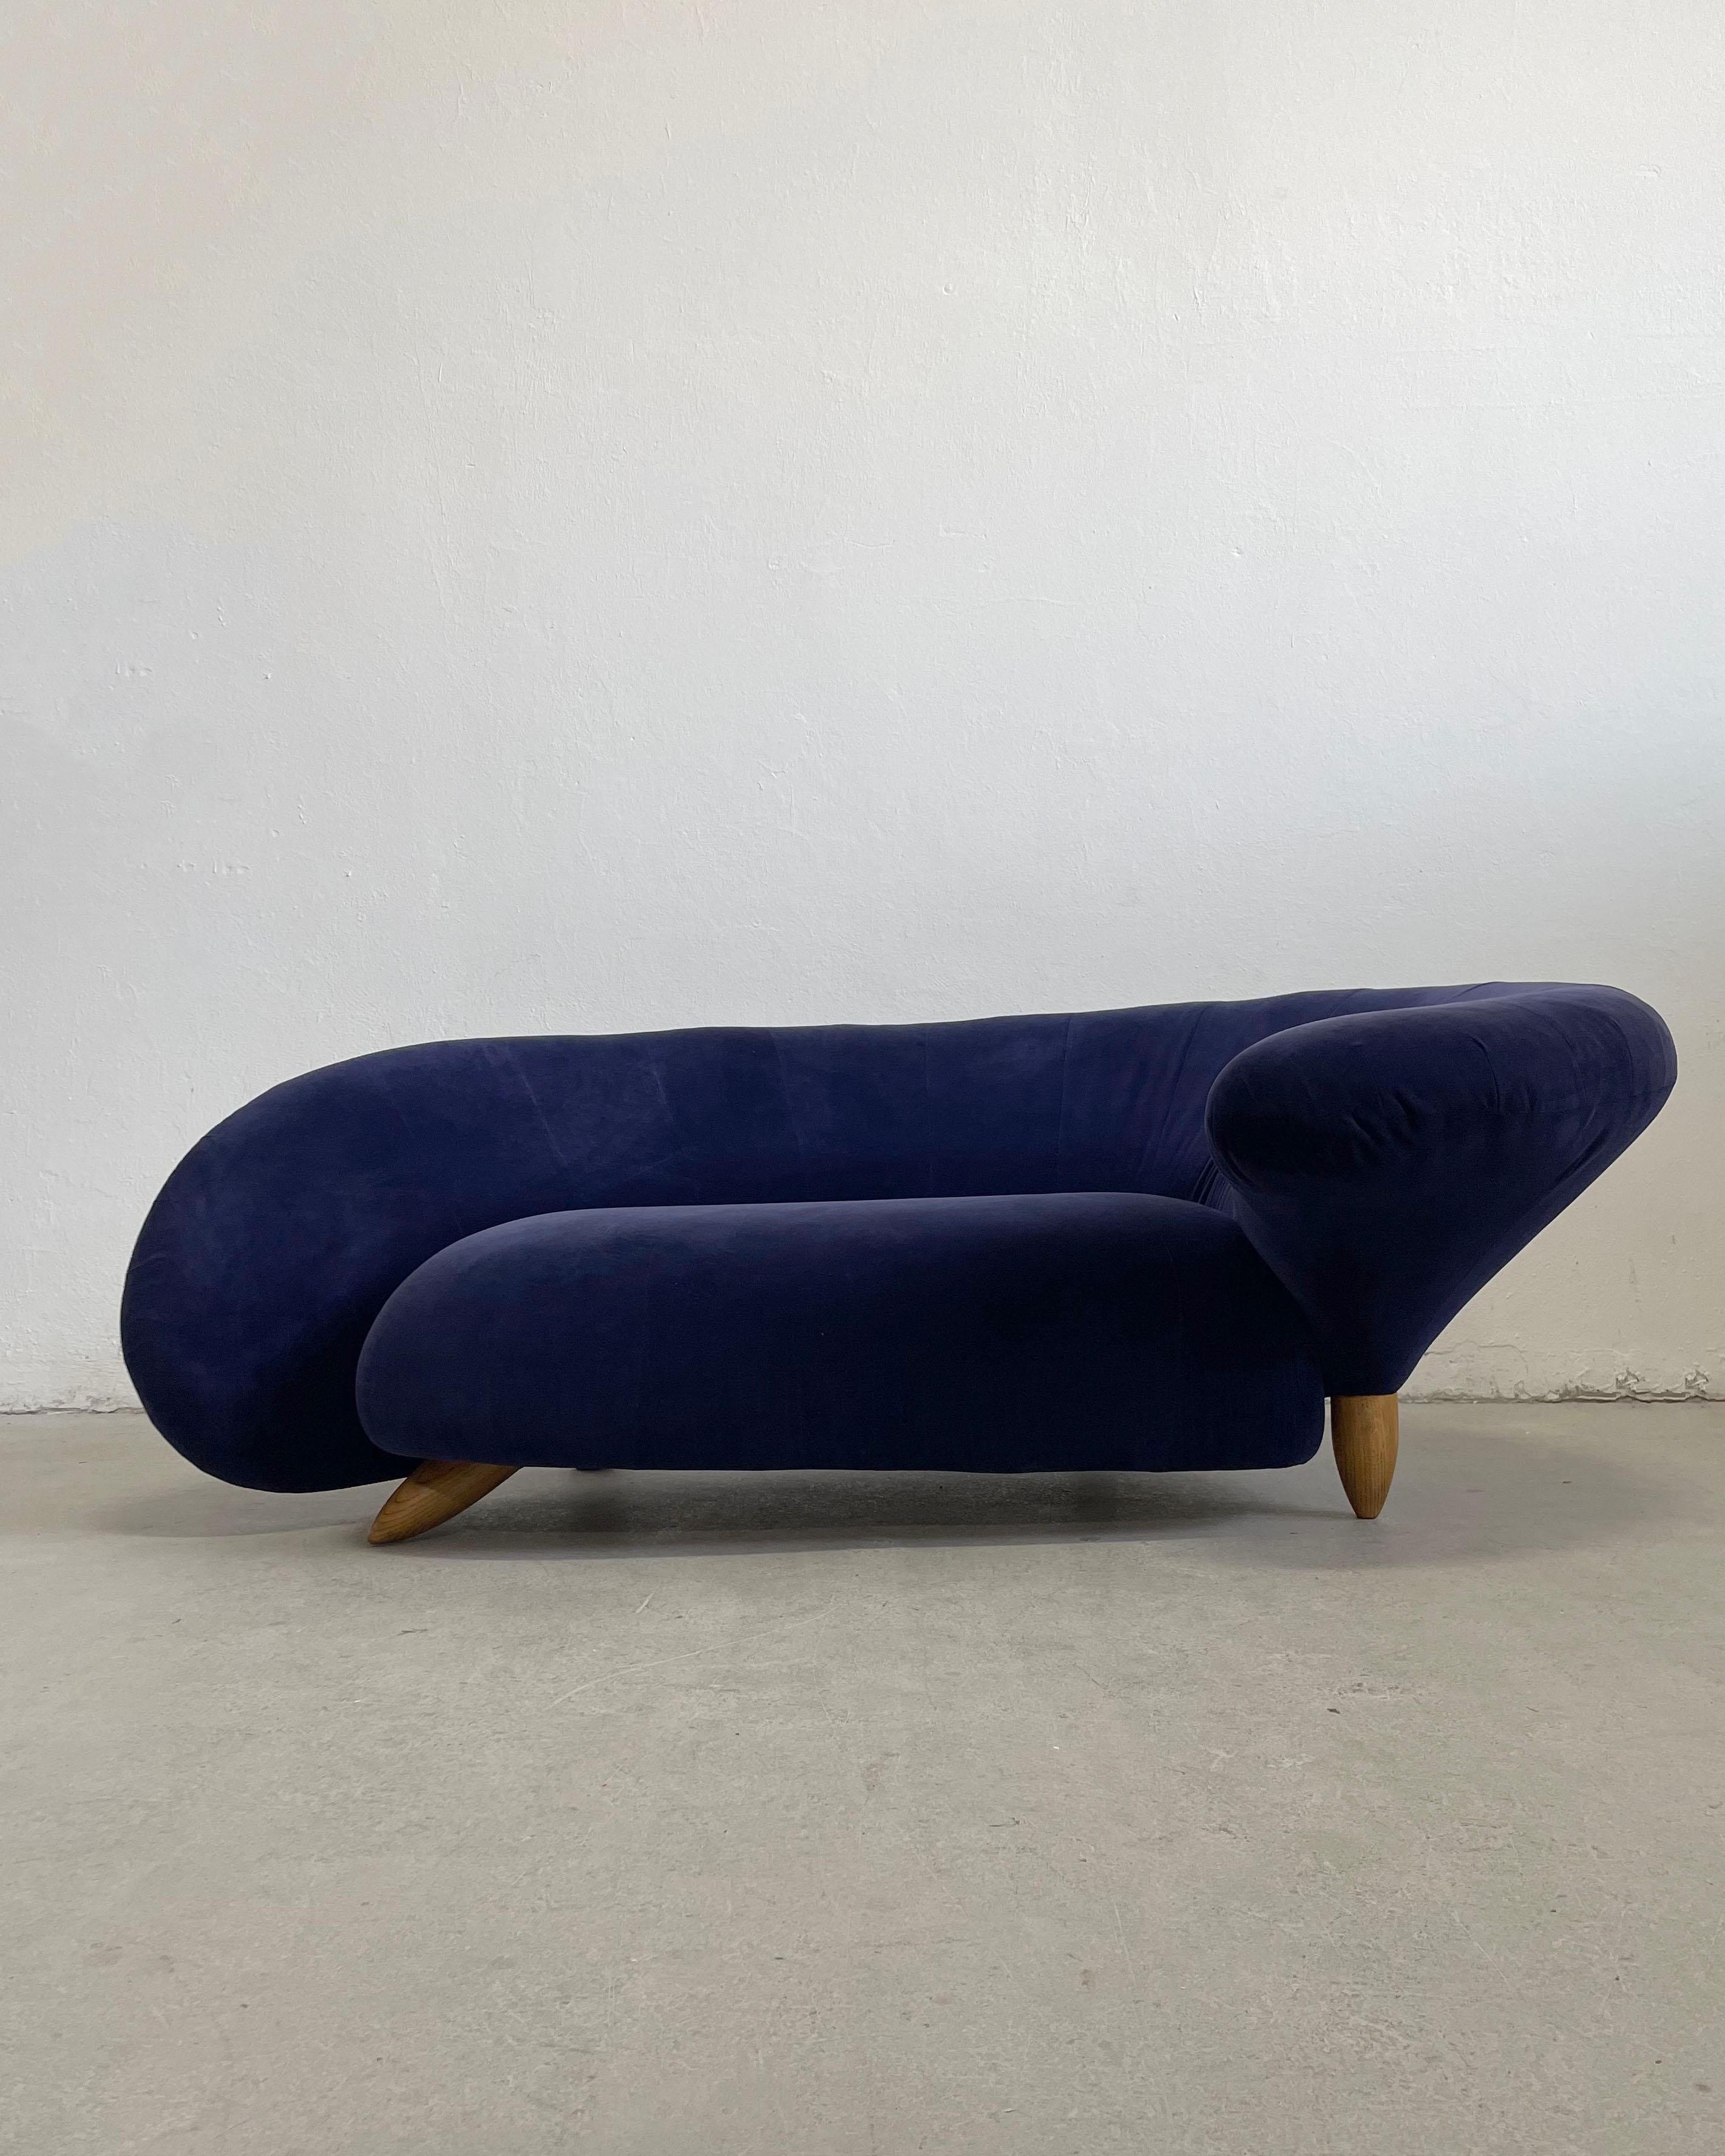 Exceptionally well crafted vintage curved sculptural sofa upholstered in original navy blue velvet.

The sofa features wooden legs and a wooden frame which is reinforced with a strong metal structure visible on the bottom side of the sofa. 
The